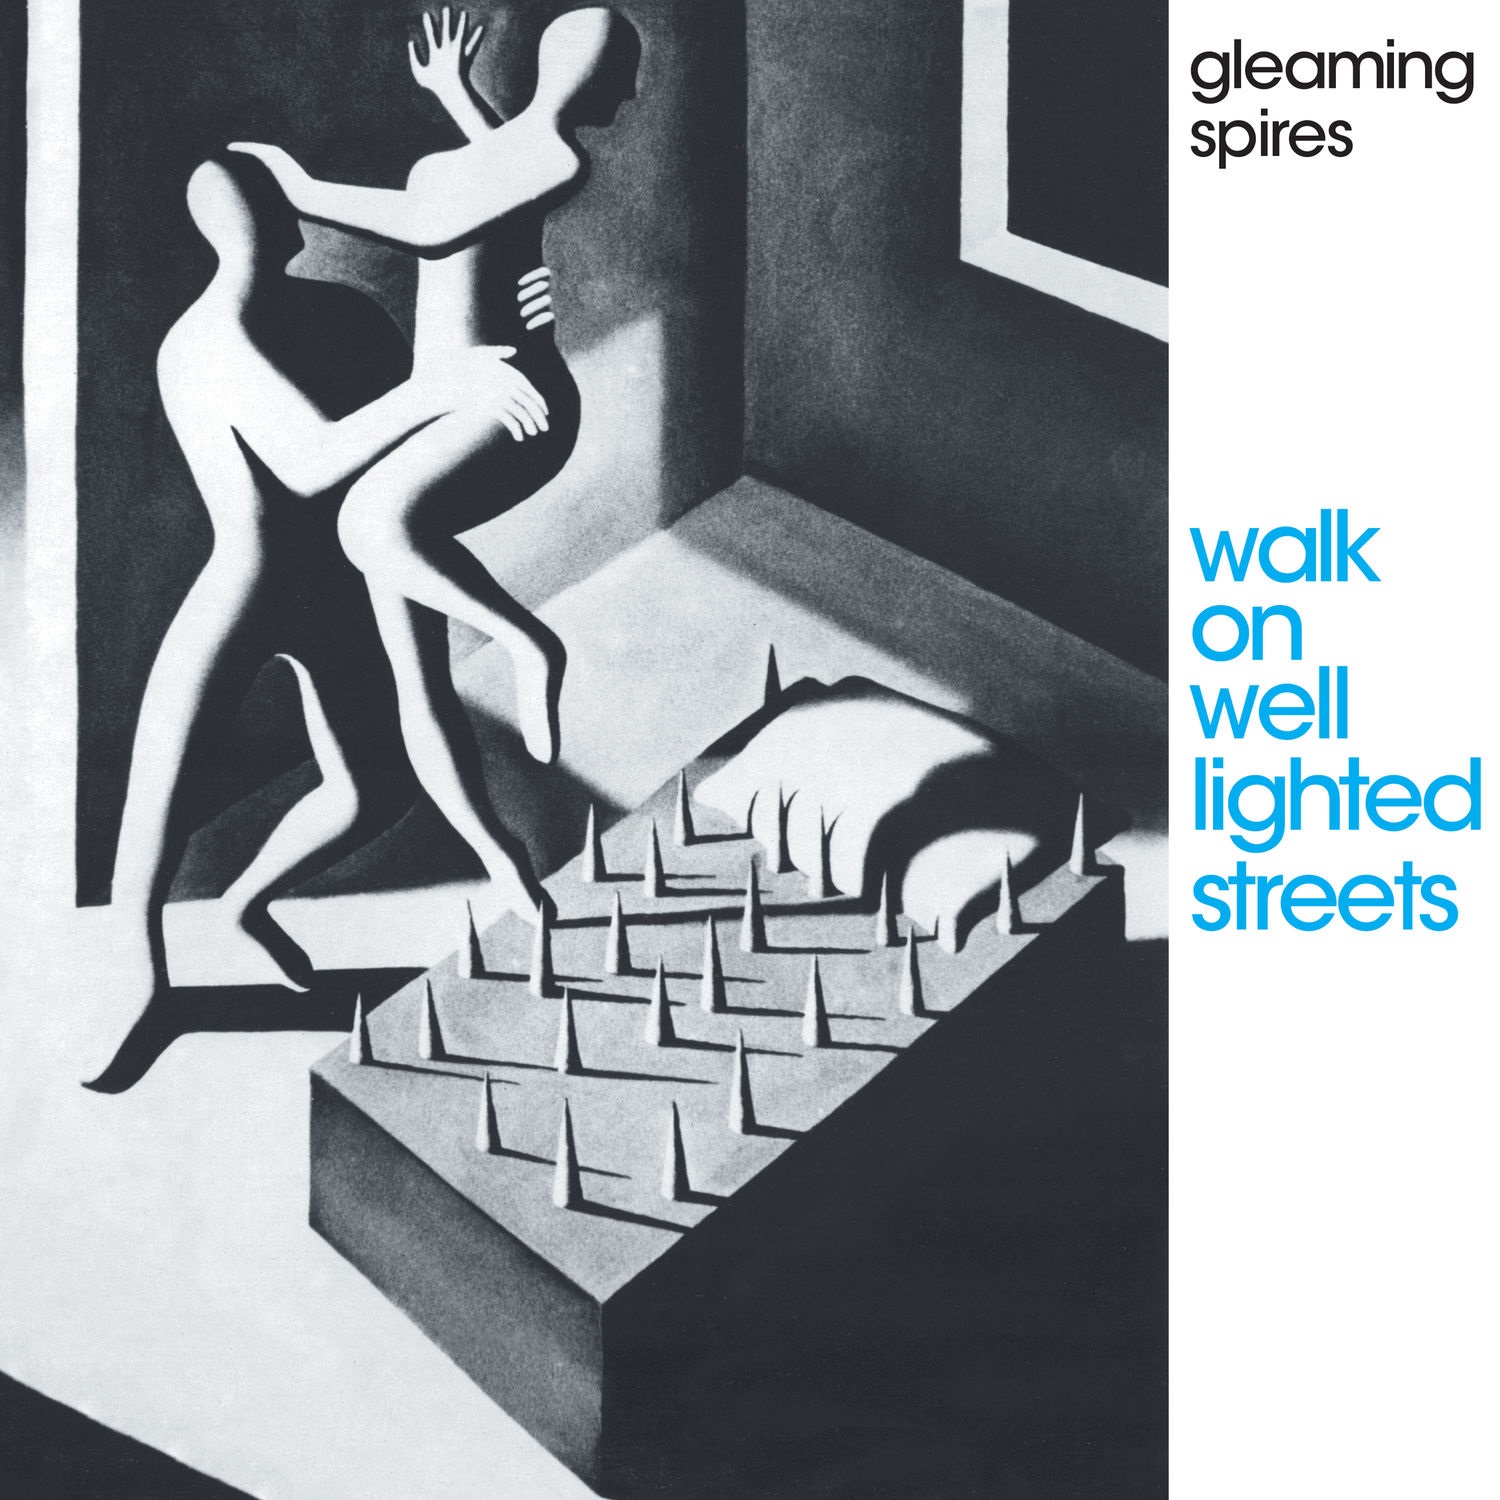 Gleaming Spires – Walk on Well Lighted Streets (Expanded Edition) (1983/2021) [FLAC 24bit/96kHz]